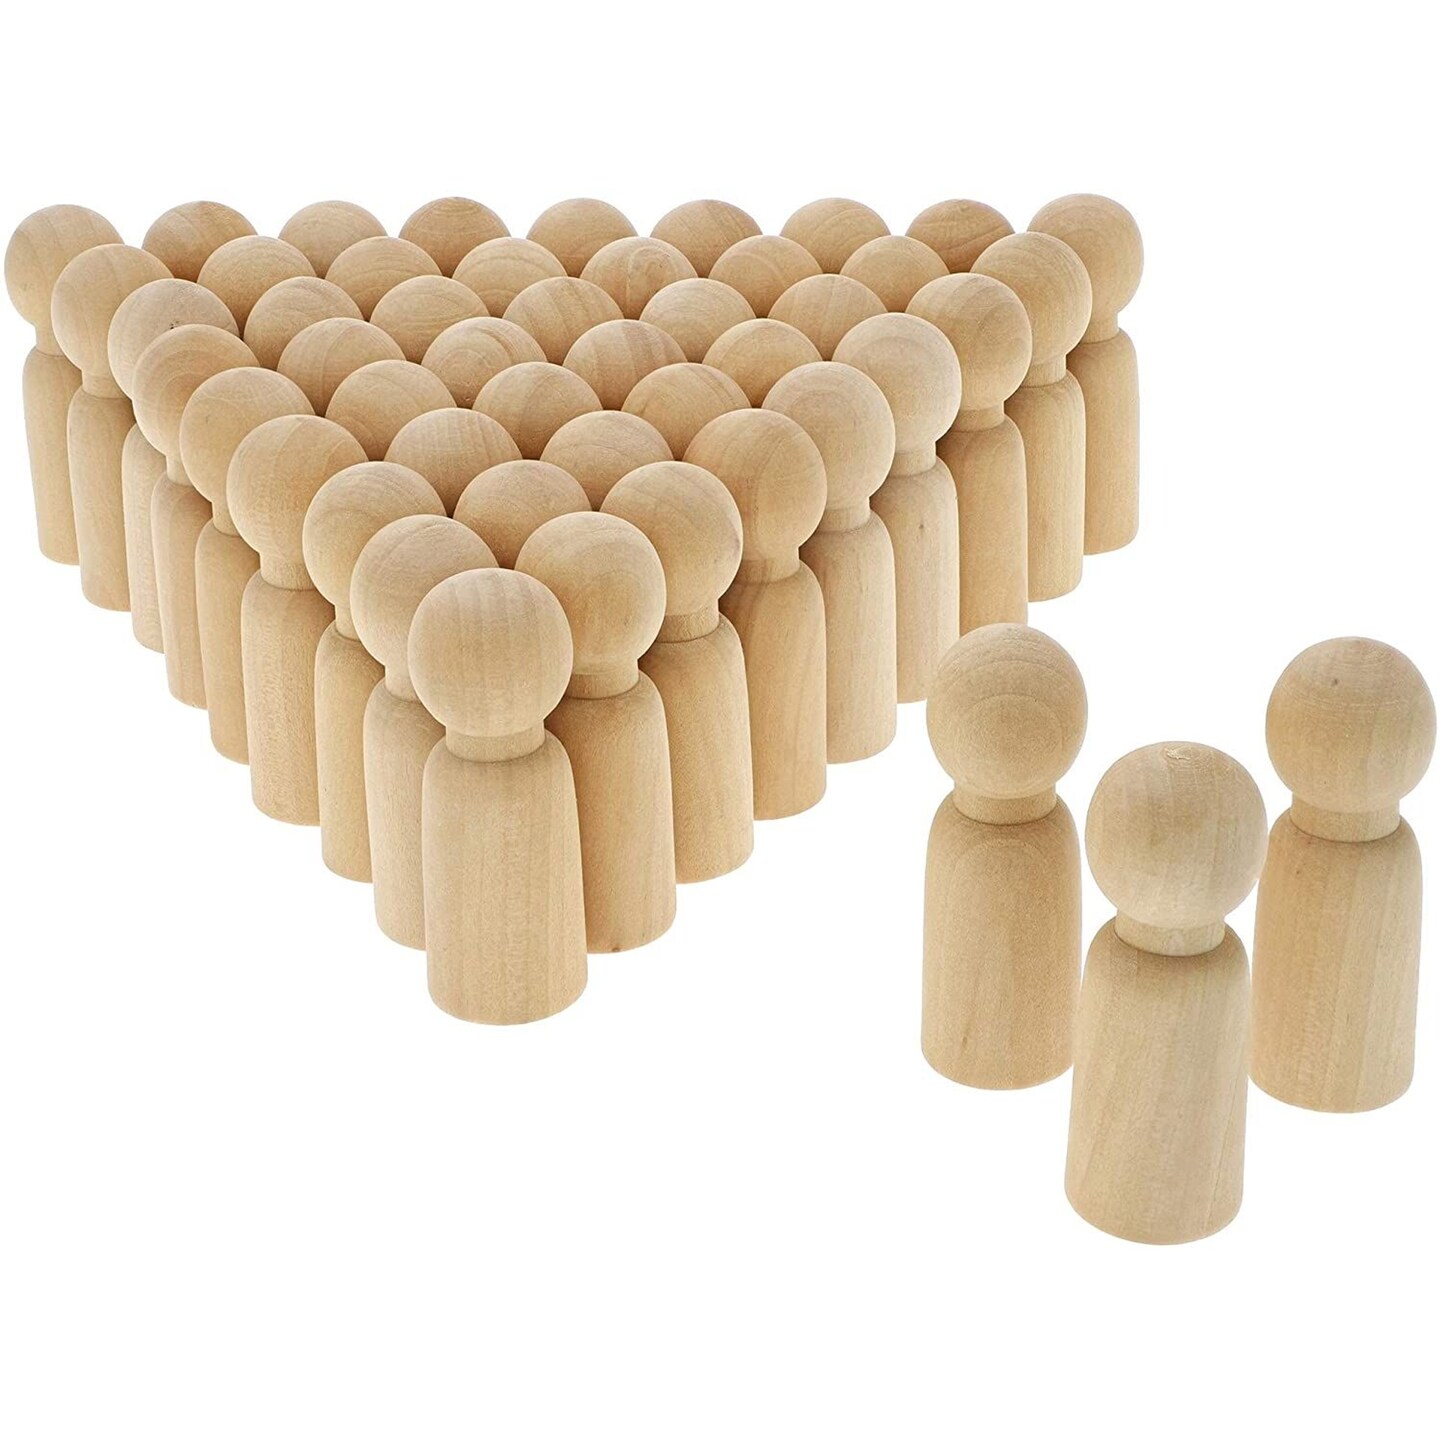 Wooden Craft Balls 2.4 in - Unfinished Wood Beads for Crafts & Decor,  10-Pack